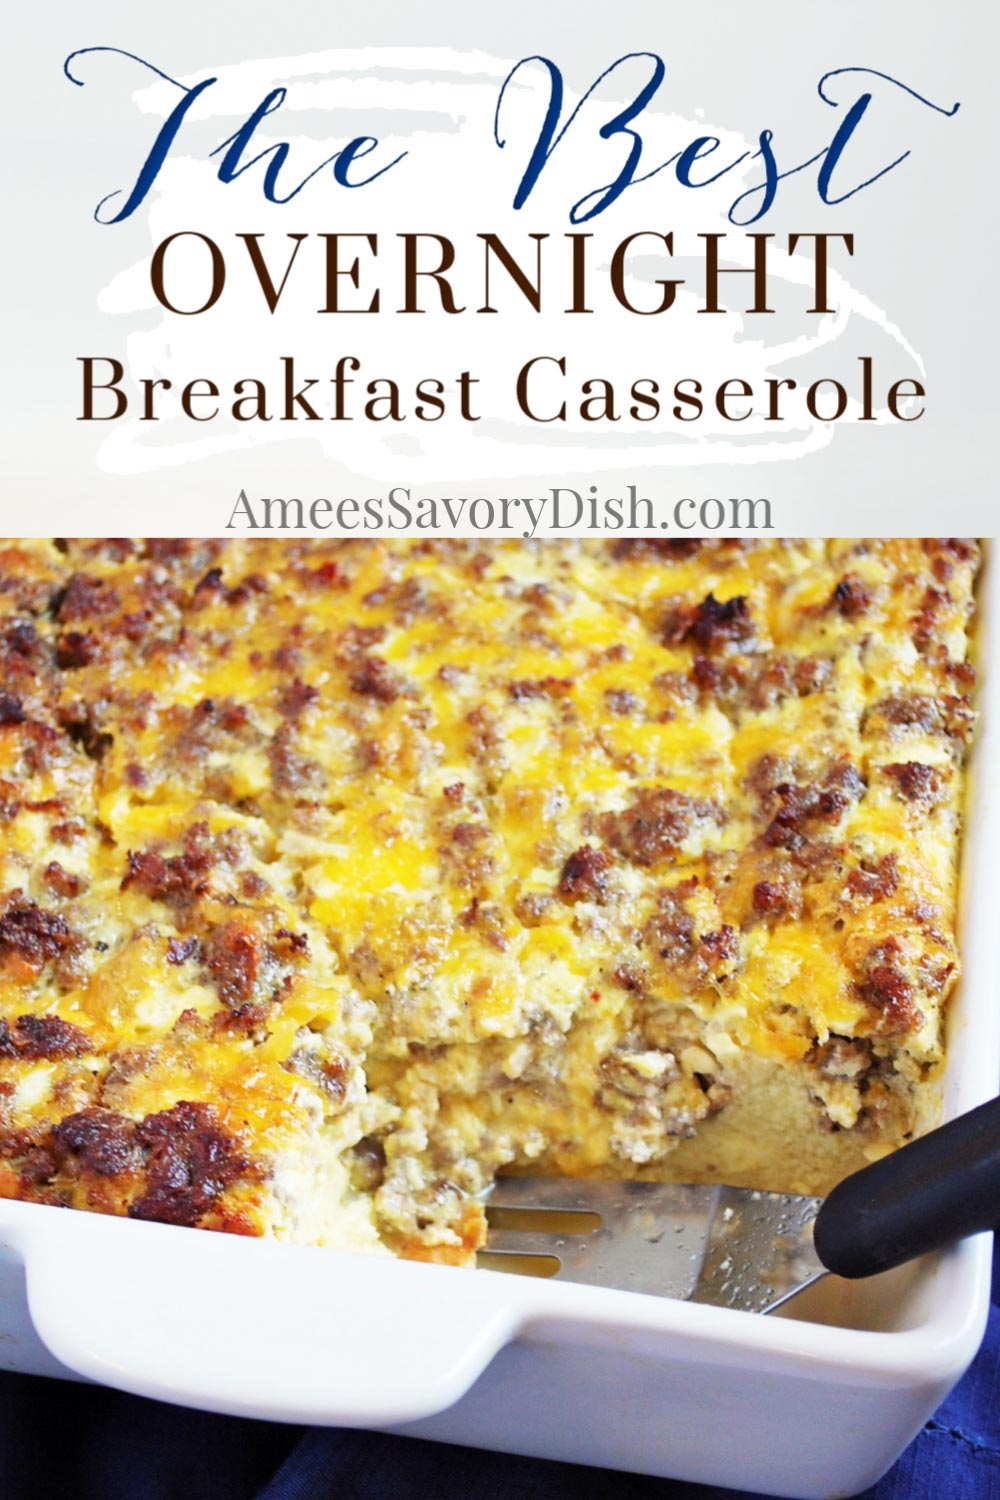 Sausage and egg overnight breakfast casserole is a baked egg casserole with pork sausage, onions, cheddar cheese, and spices, baked together with cubes of whole-grain bread. This delicious breakfast casserole recipe is sometimes known as a breakfast strata. #breakfastcasserole #sausageeggcasserole #breakfaststrata #overnightcasserole via @Ameessavorydish